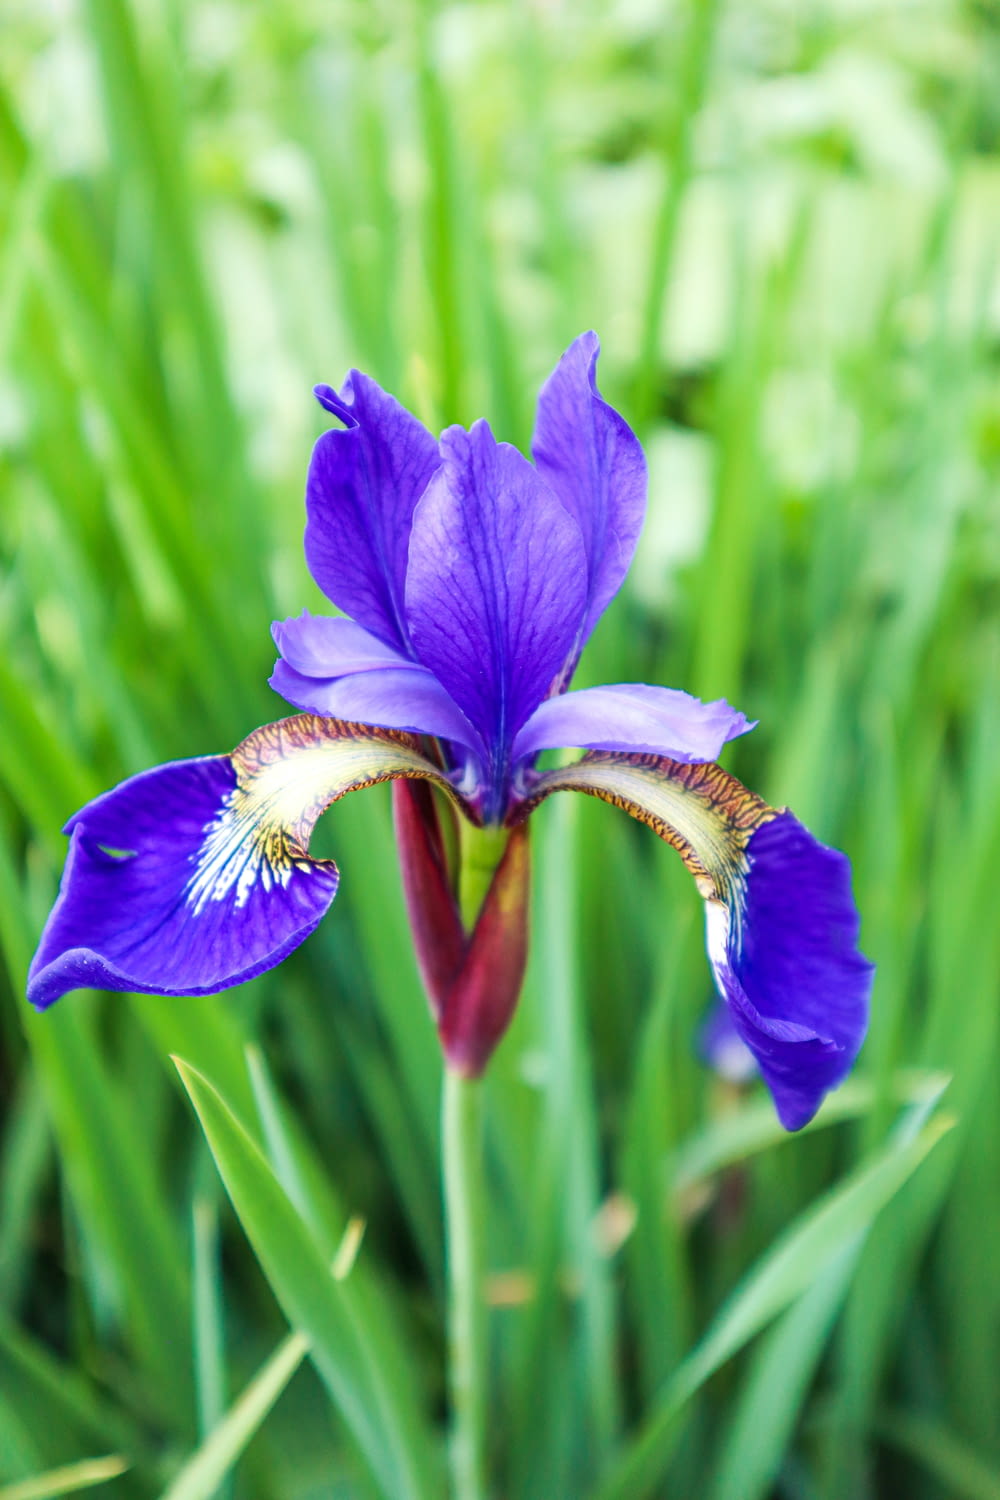 a purple flower in the middle of some green grass